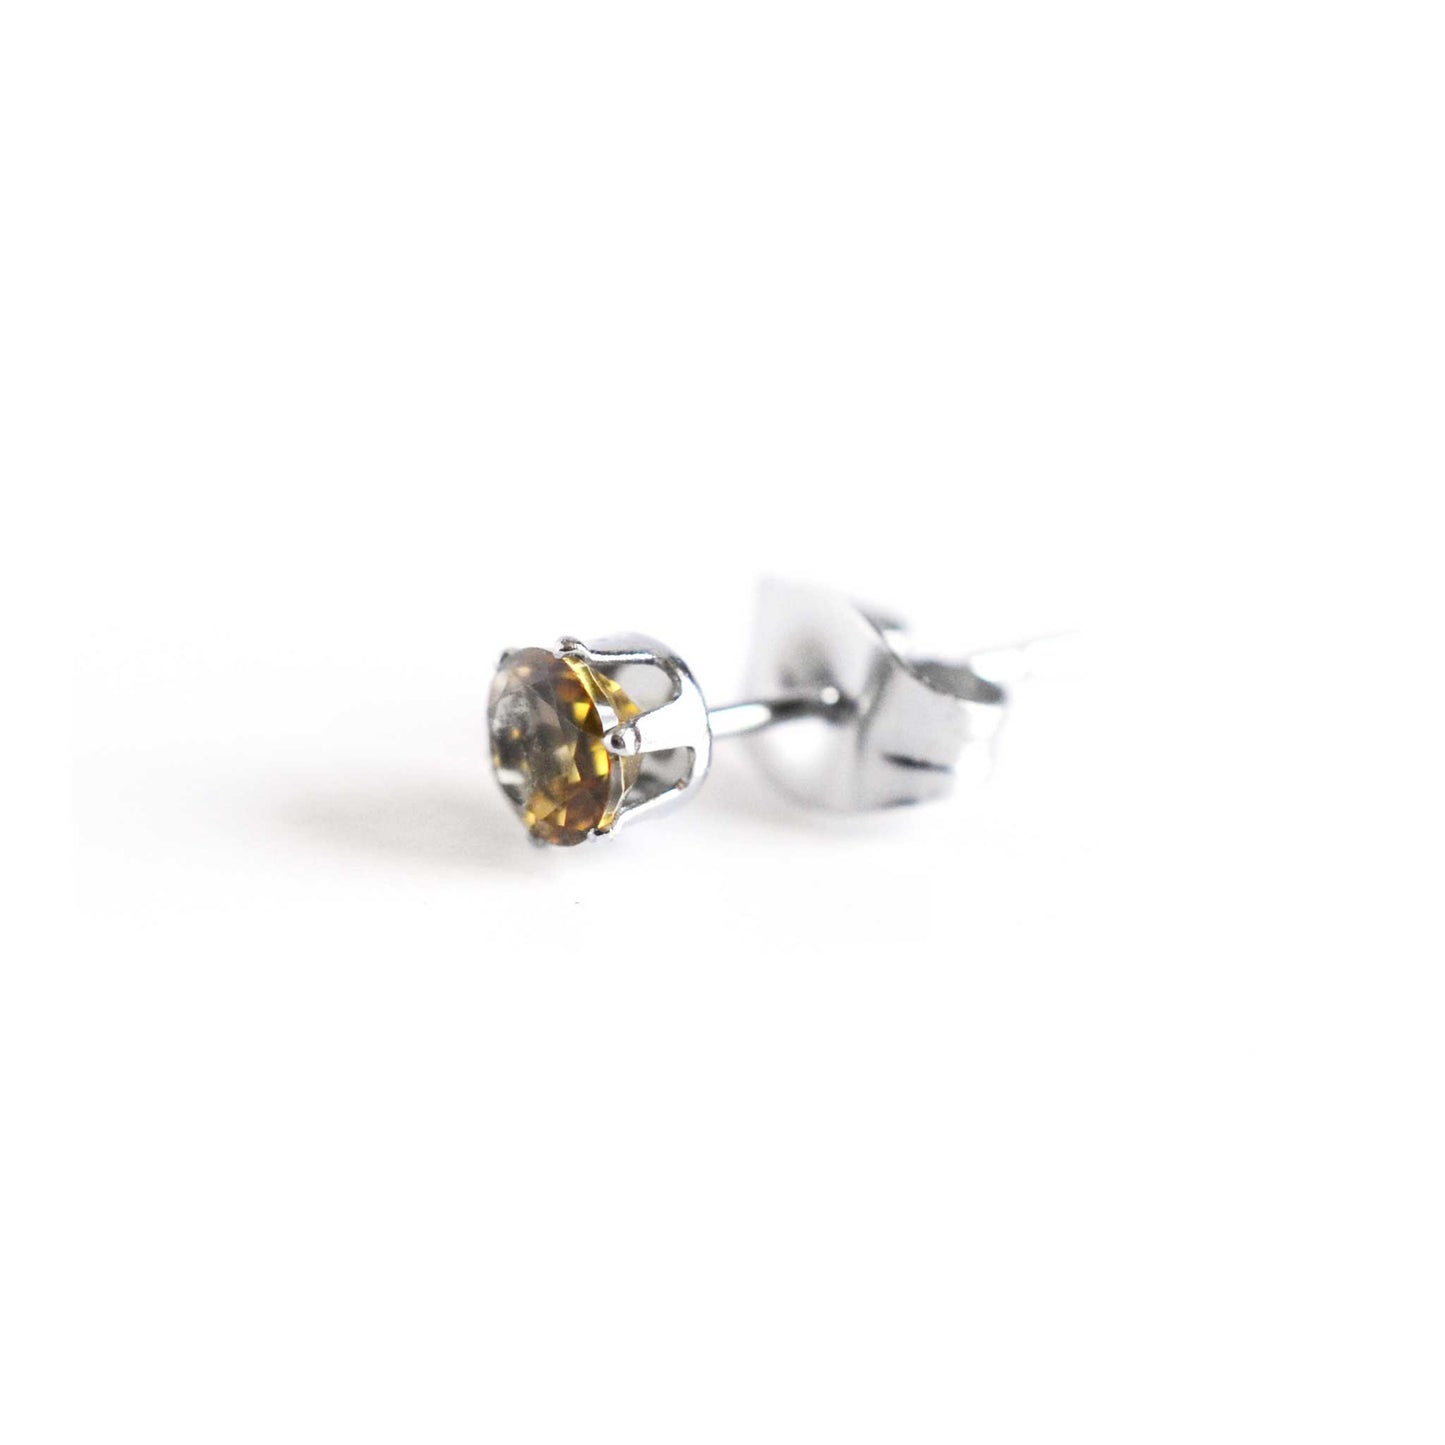 Side view of yellow Citrine faceted stud earring with butterfly back on white background